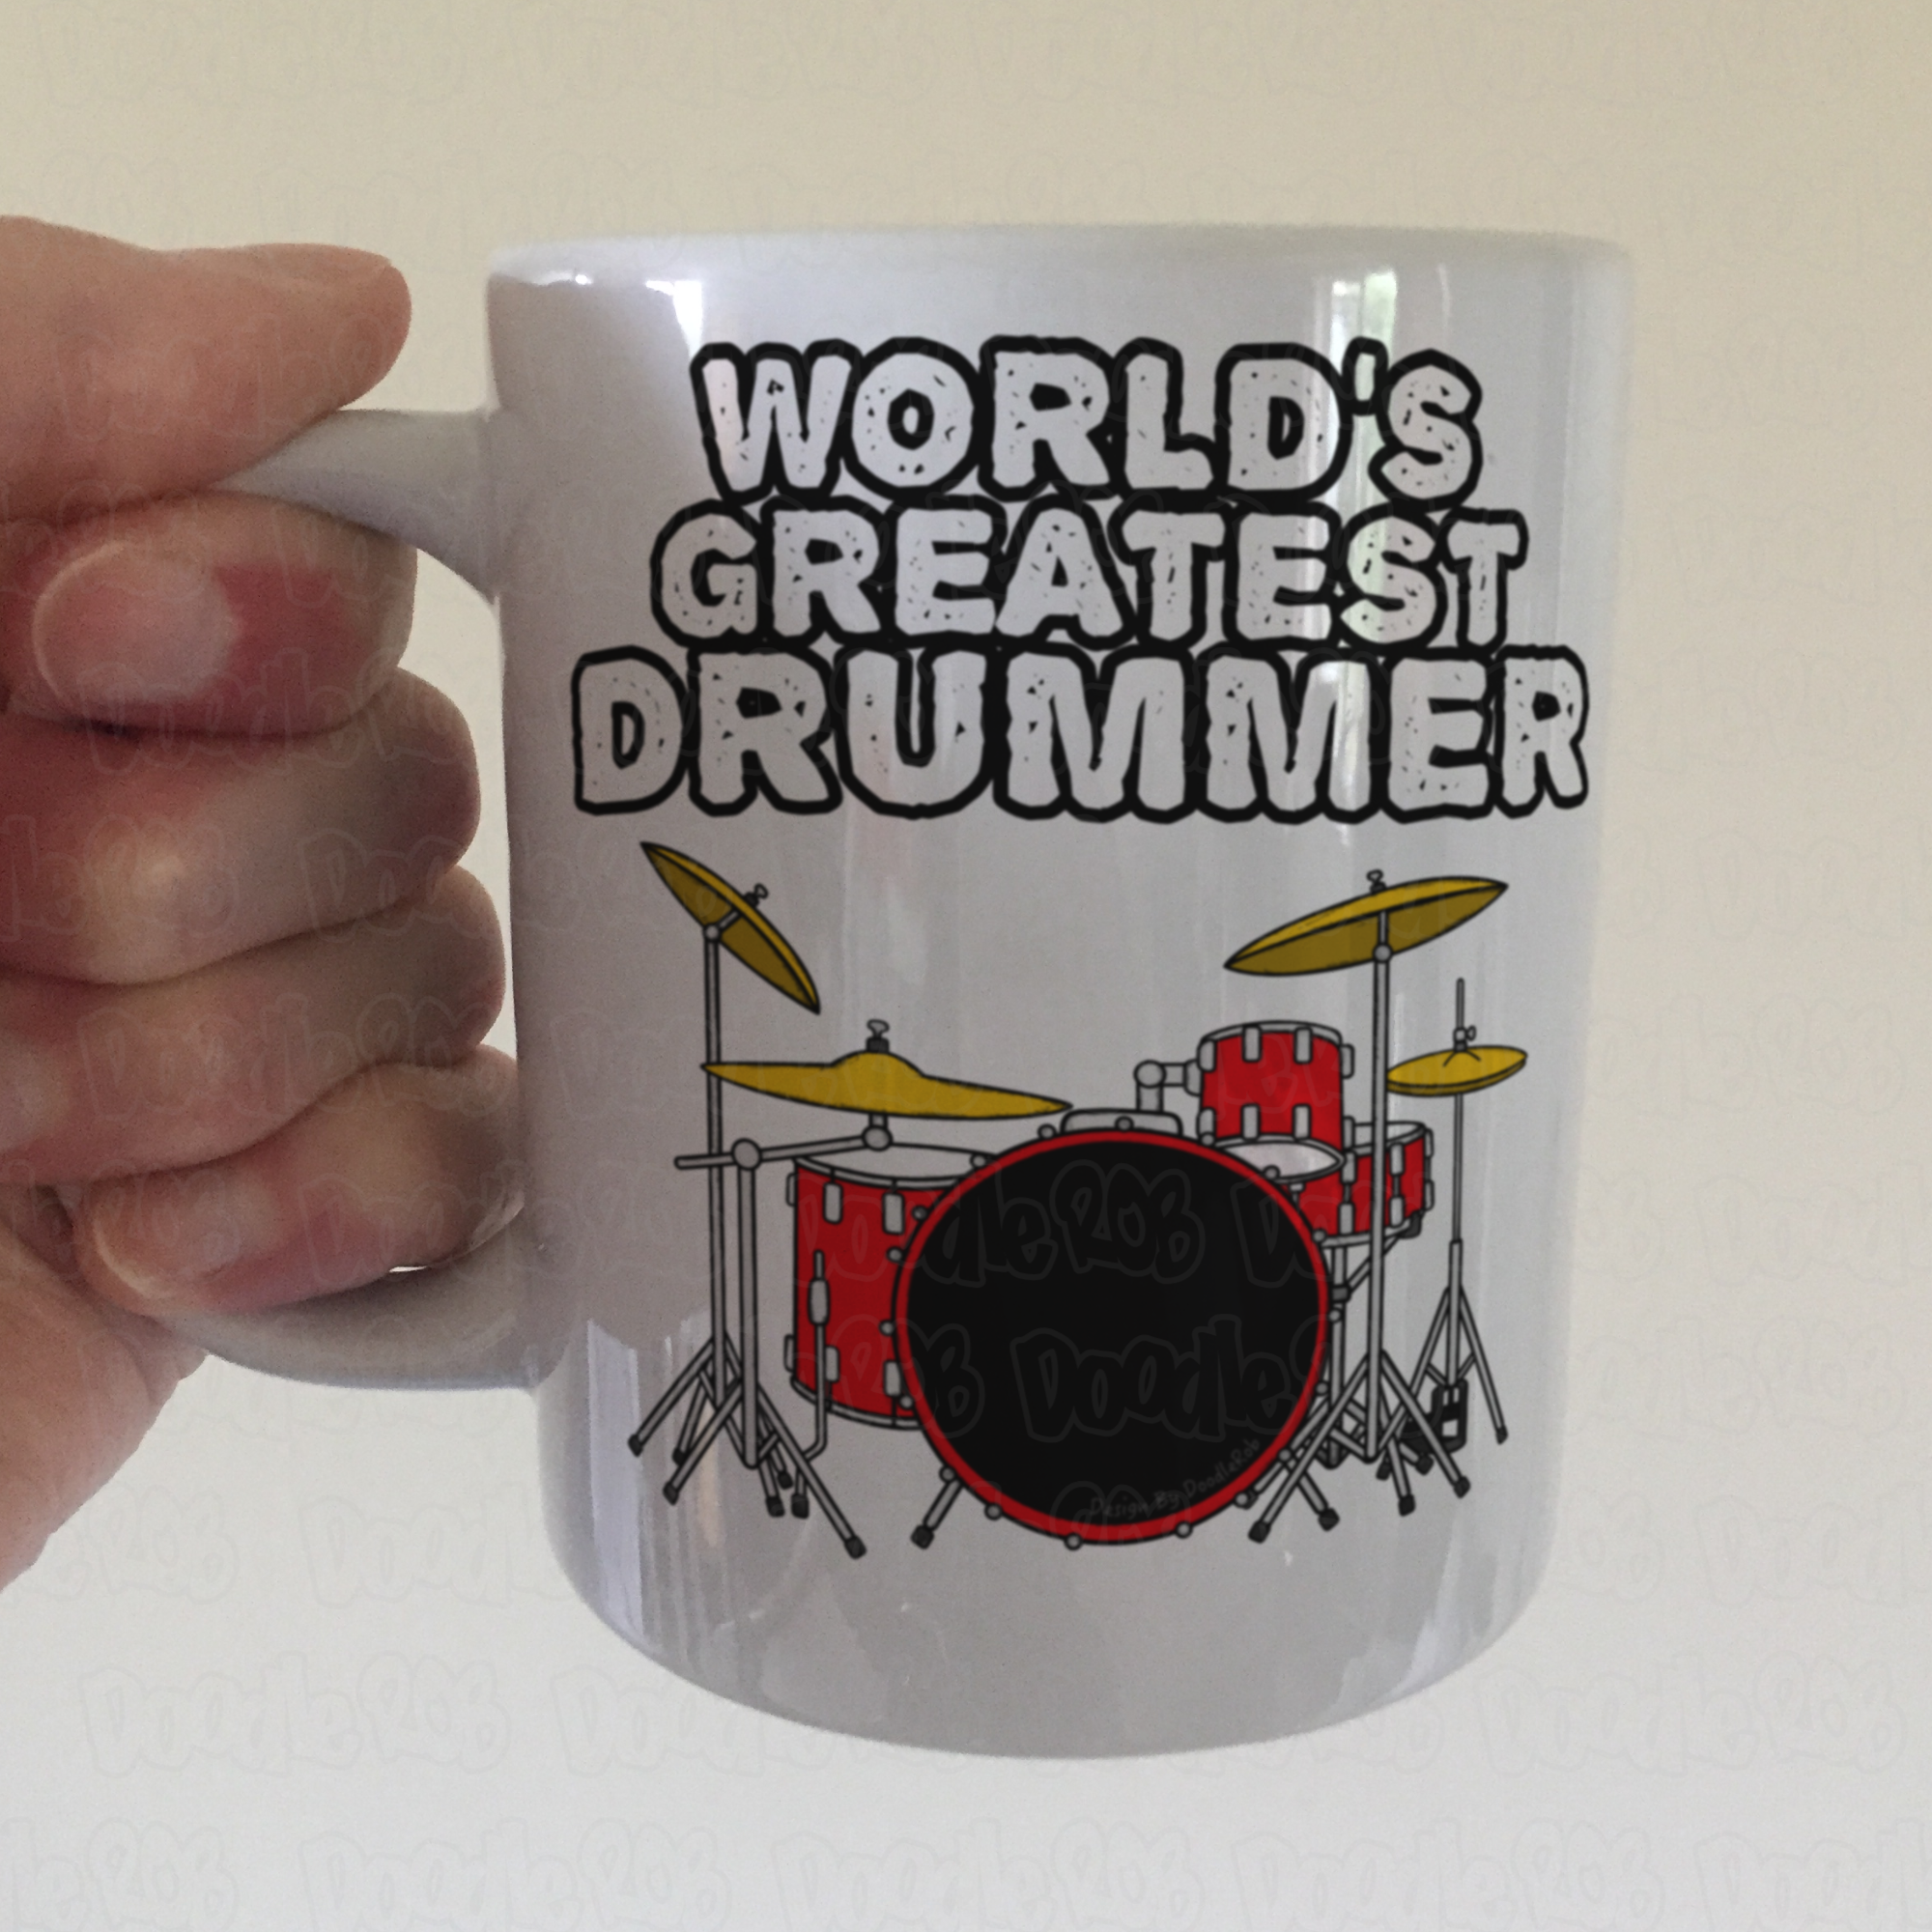 10 Gifts for Drummers That Show You Know Your Stuff